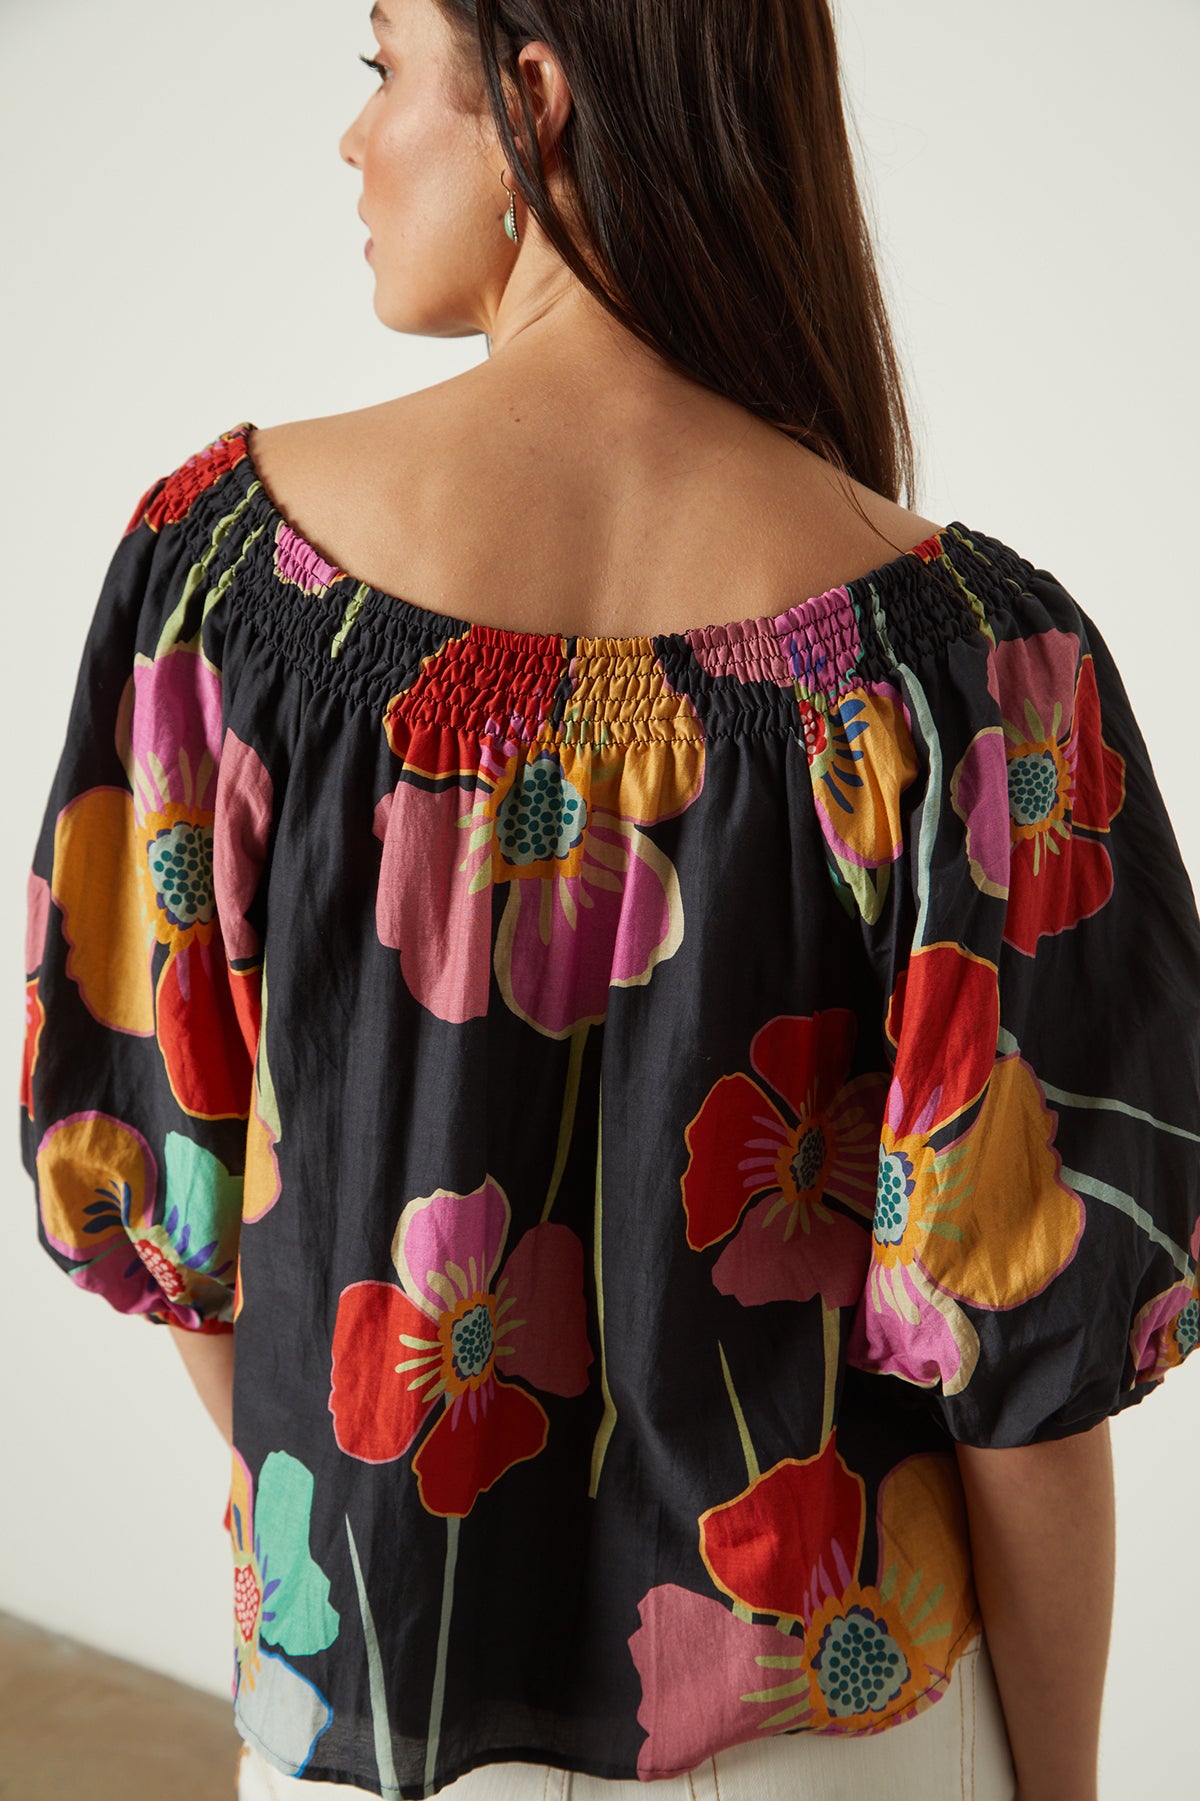   Jasmine Top in bold floral with black background back close up 